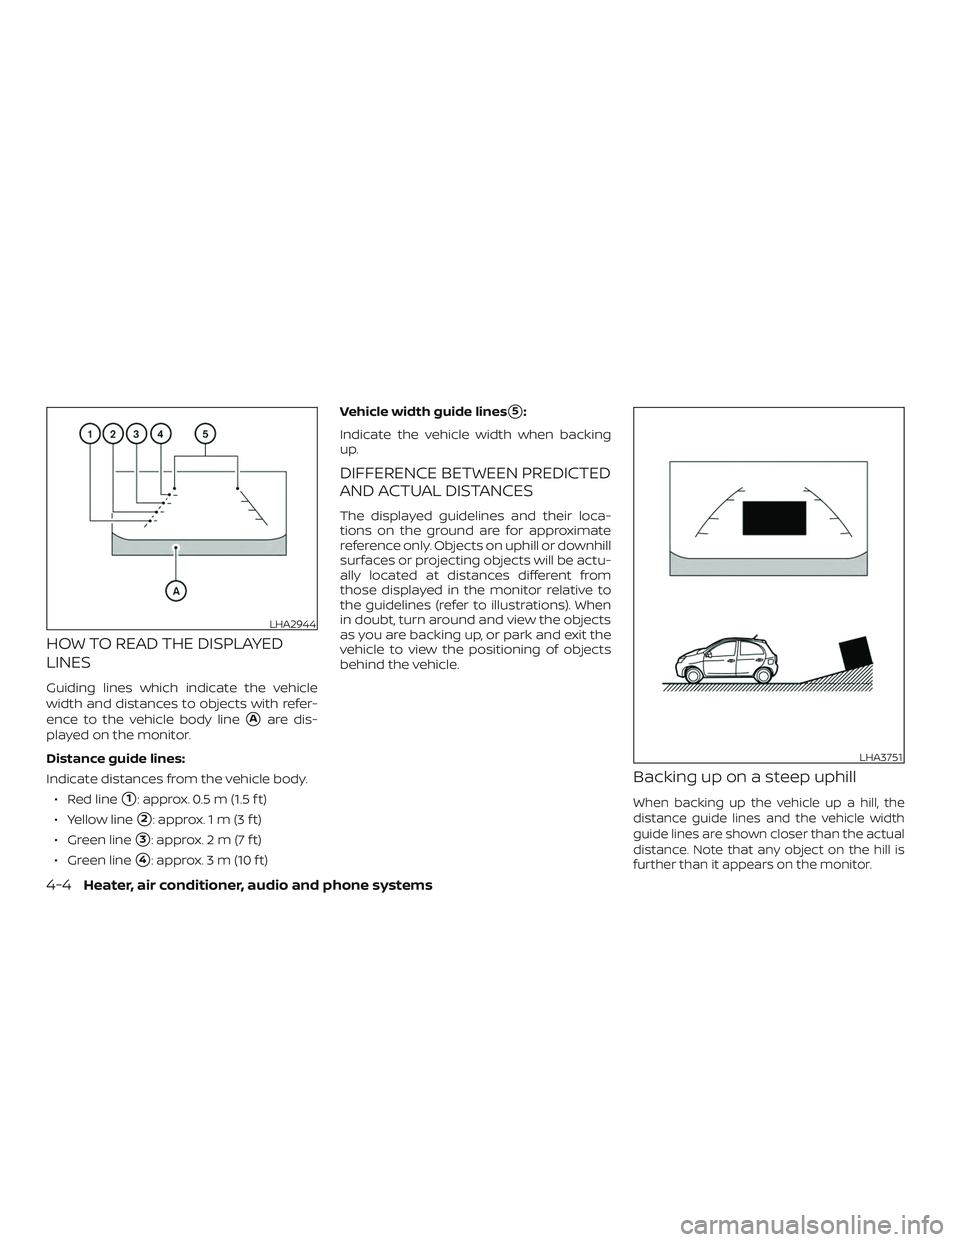 NISSAN MICRA 2018  Owner´s Manual HOW TO READ THE DISPLAYED
LINES
Guiding lines which indicate the vehicle
width and distances to objects with refer-
ence to the vehicle body line
Aare dis-
played on the monitor.
Distance guide lines